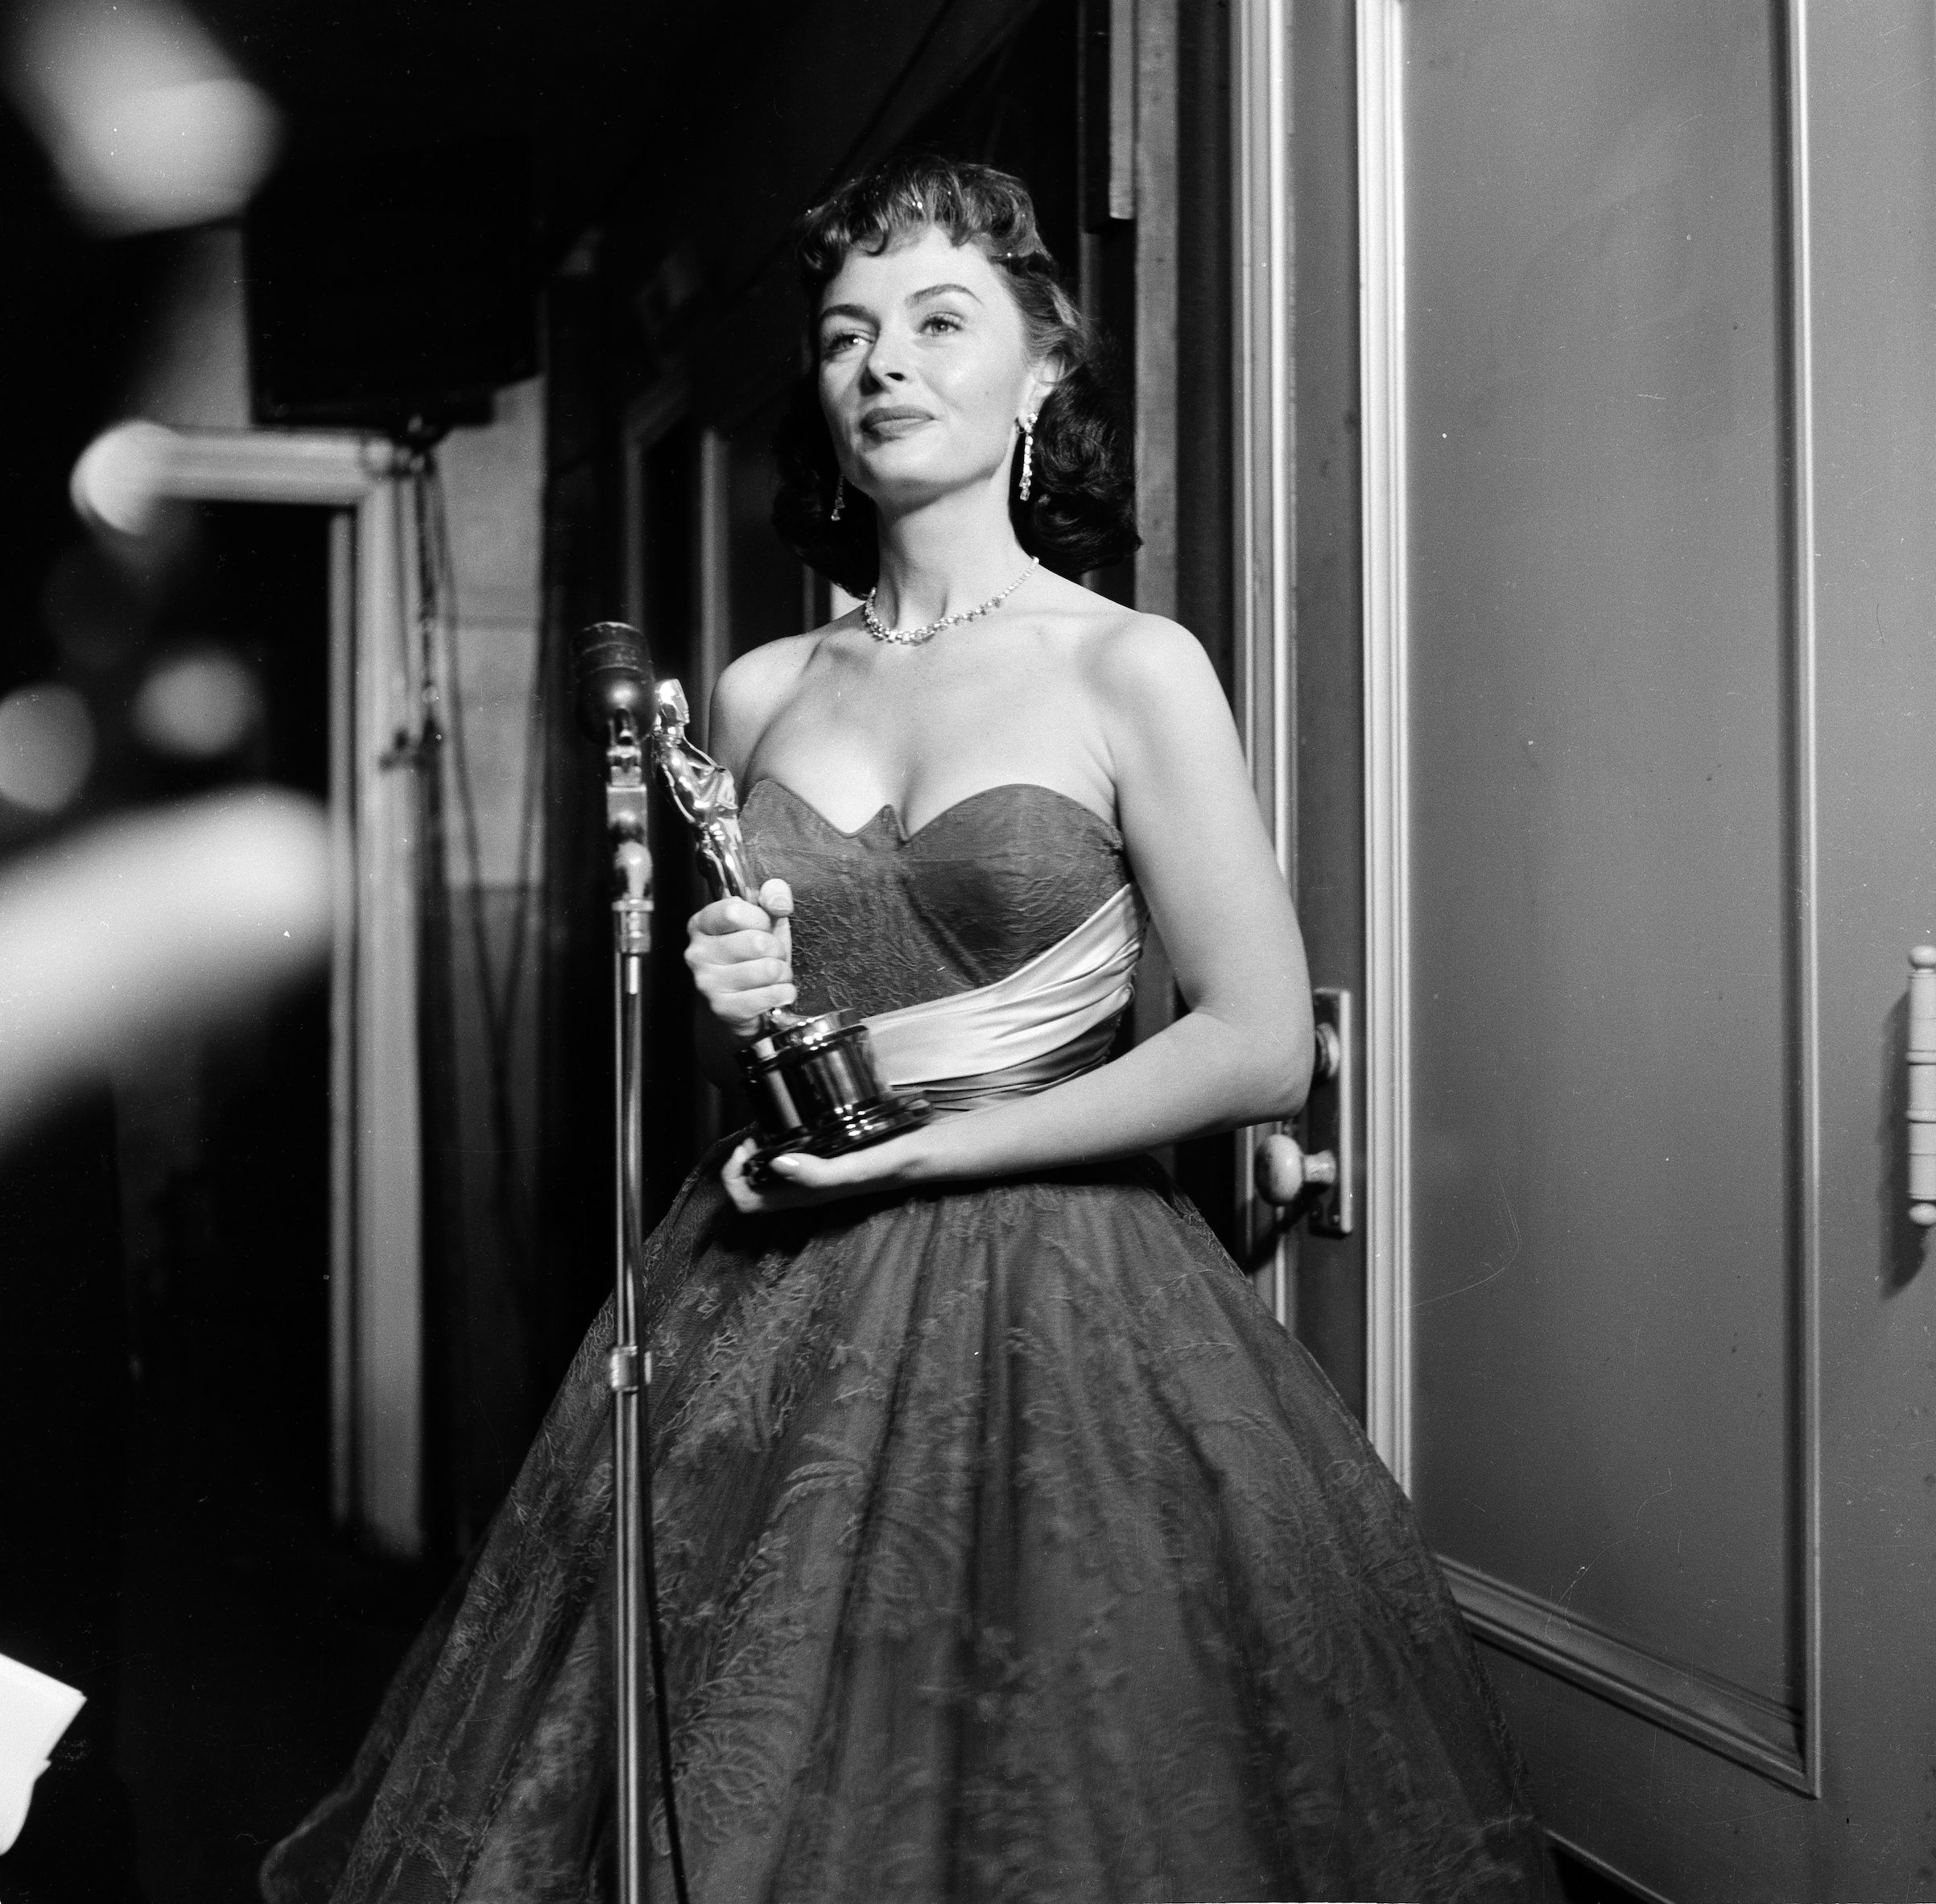 Donna Reed poses with her Academy Award for Best Supporting Actress in "From Here to Eternity" in Los Angele on March 25, 1954. (Getty Images)